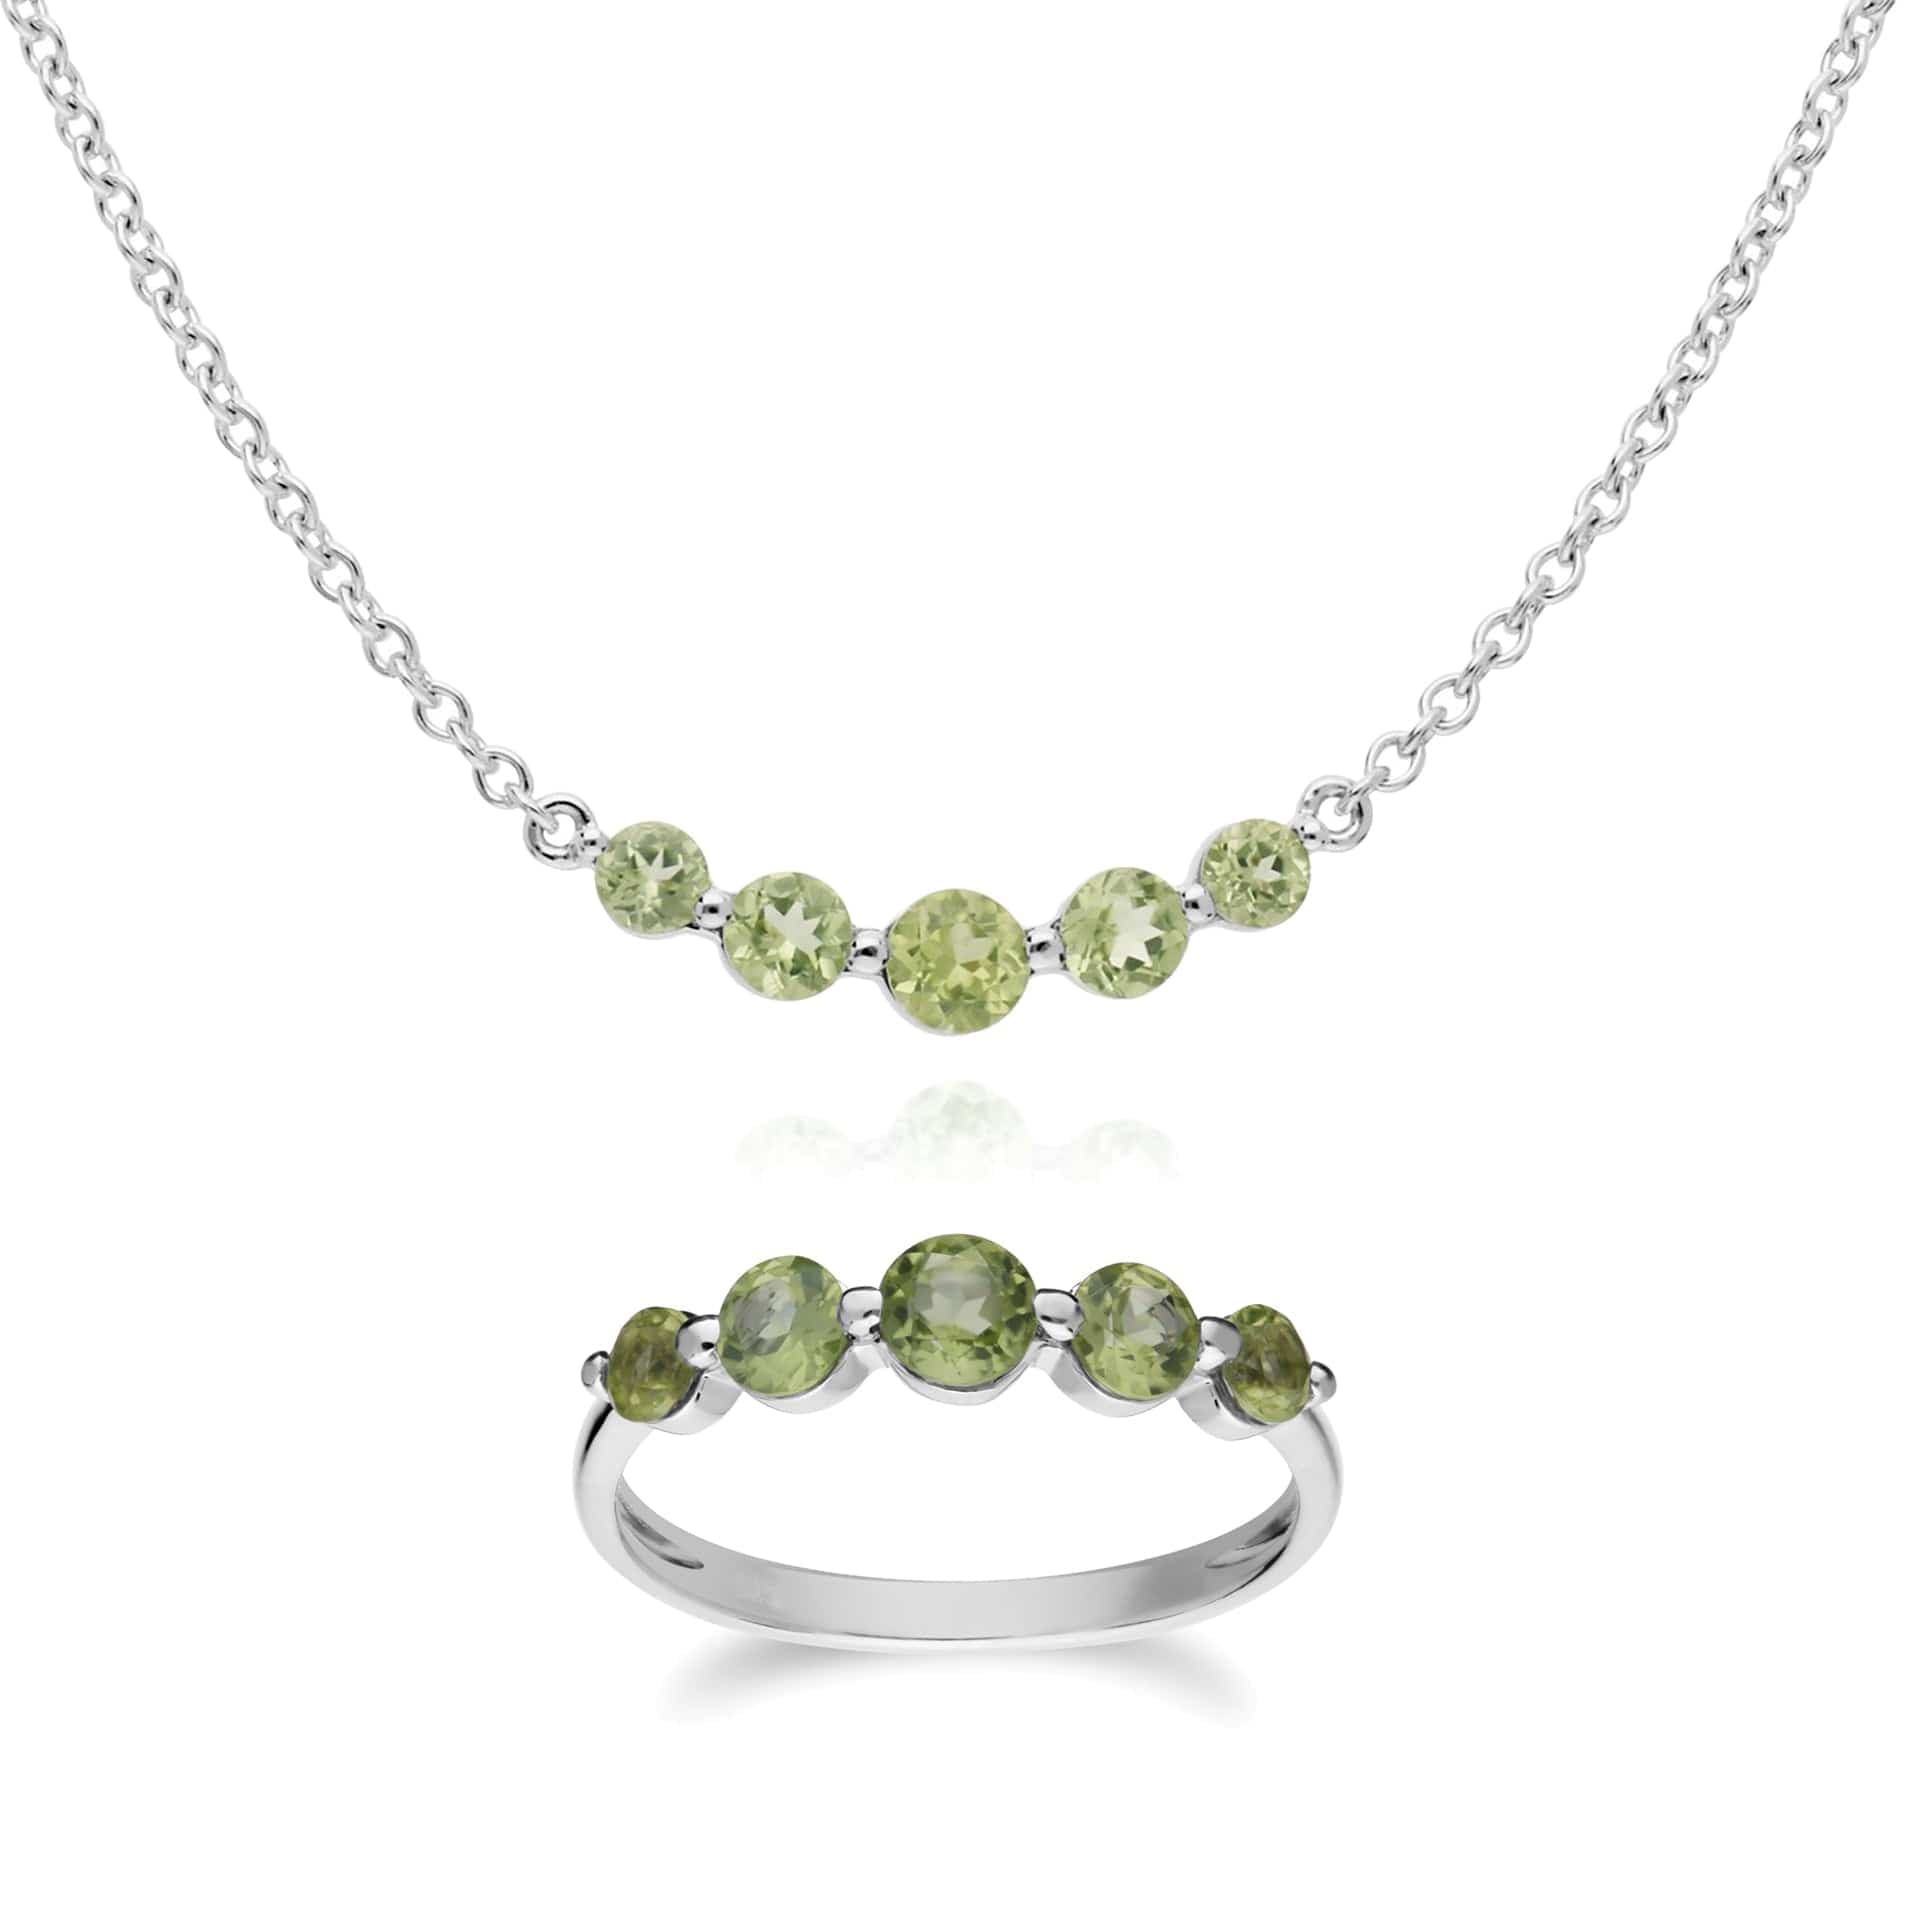 270N034104925-270R055904925 Classic Round Peridot Five Stone Gradient Ring & Necklace Set in 925 Sterling Silver 1